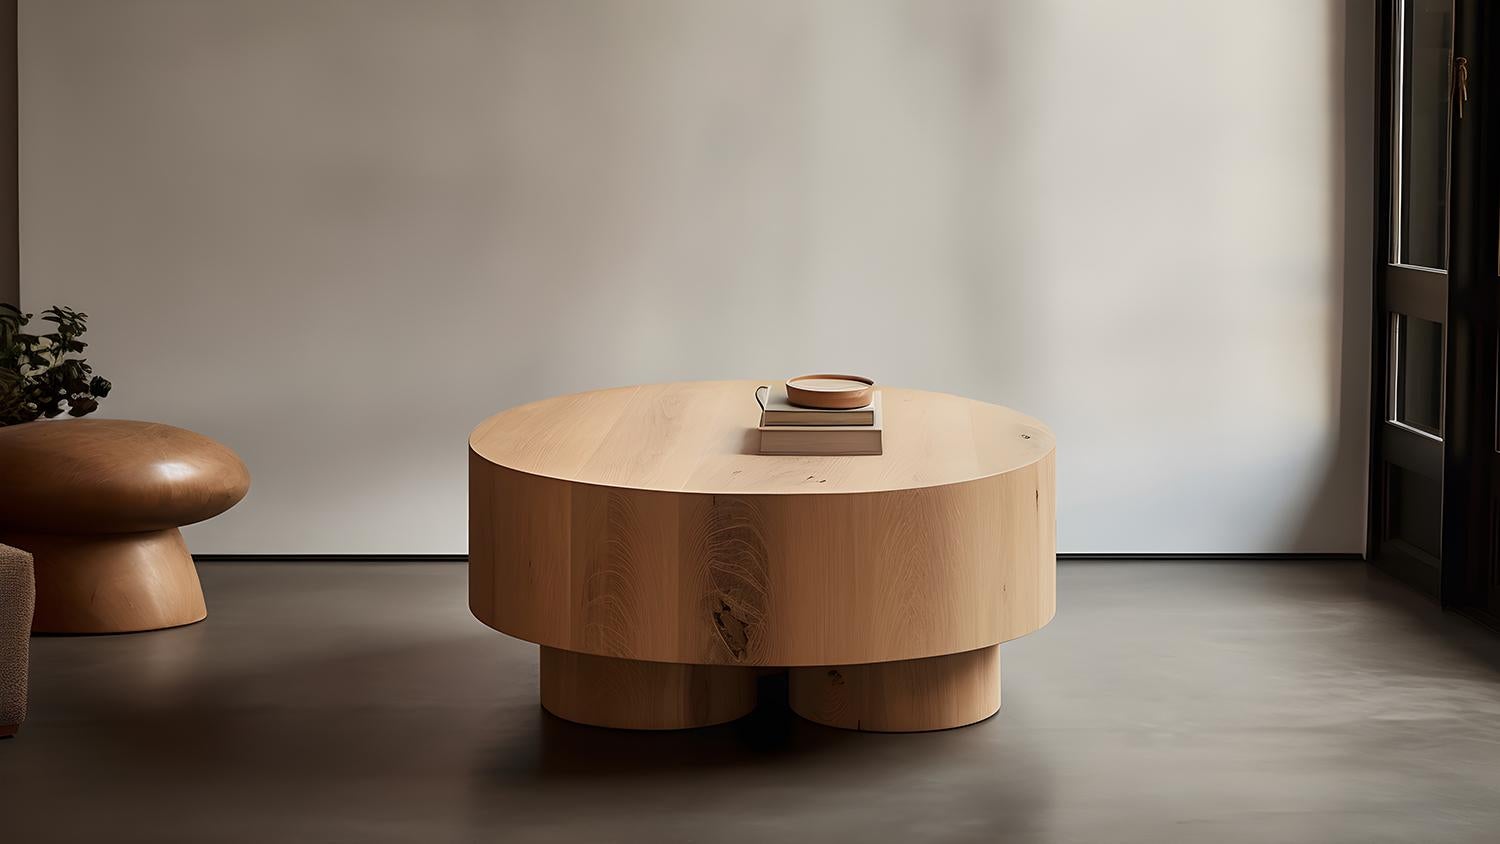 Plywood Brutalist Round Coffee Table in Red Oak Wood Veneer, Podio by NONO For Sale